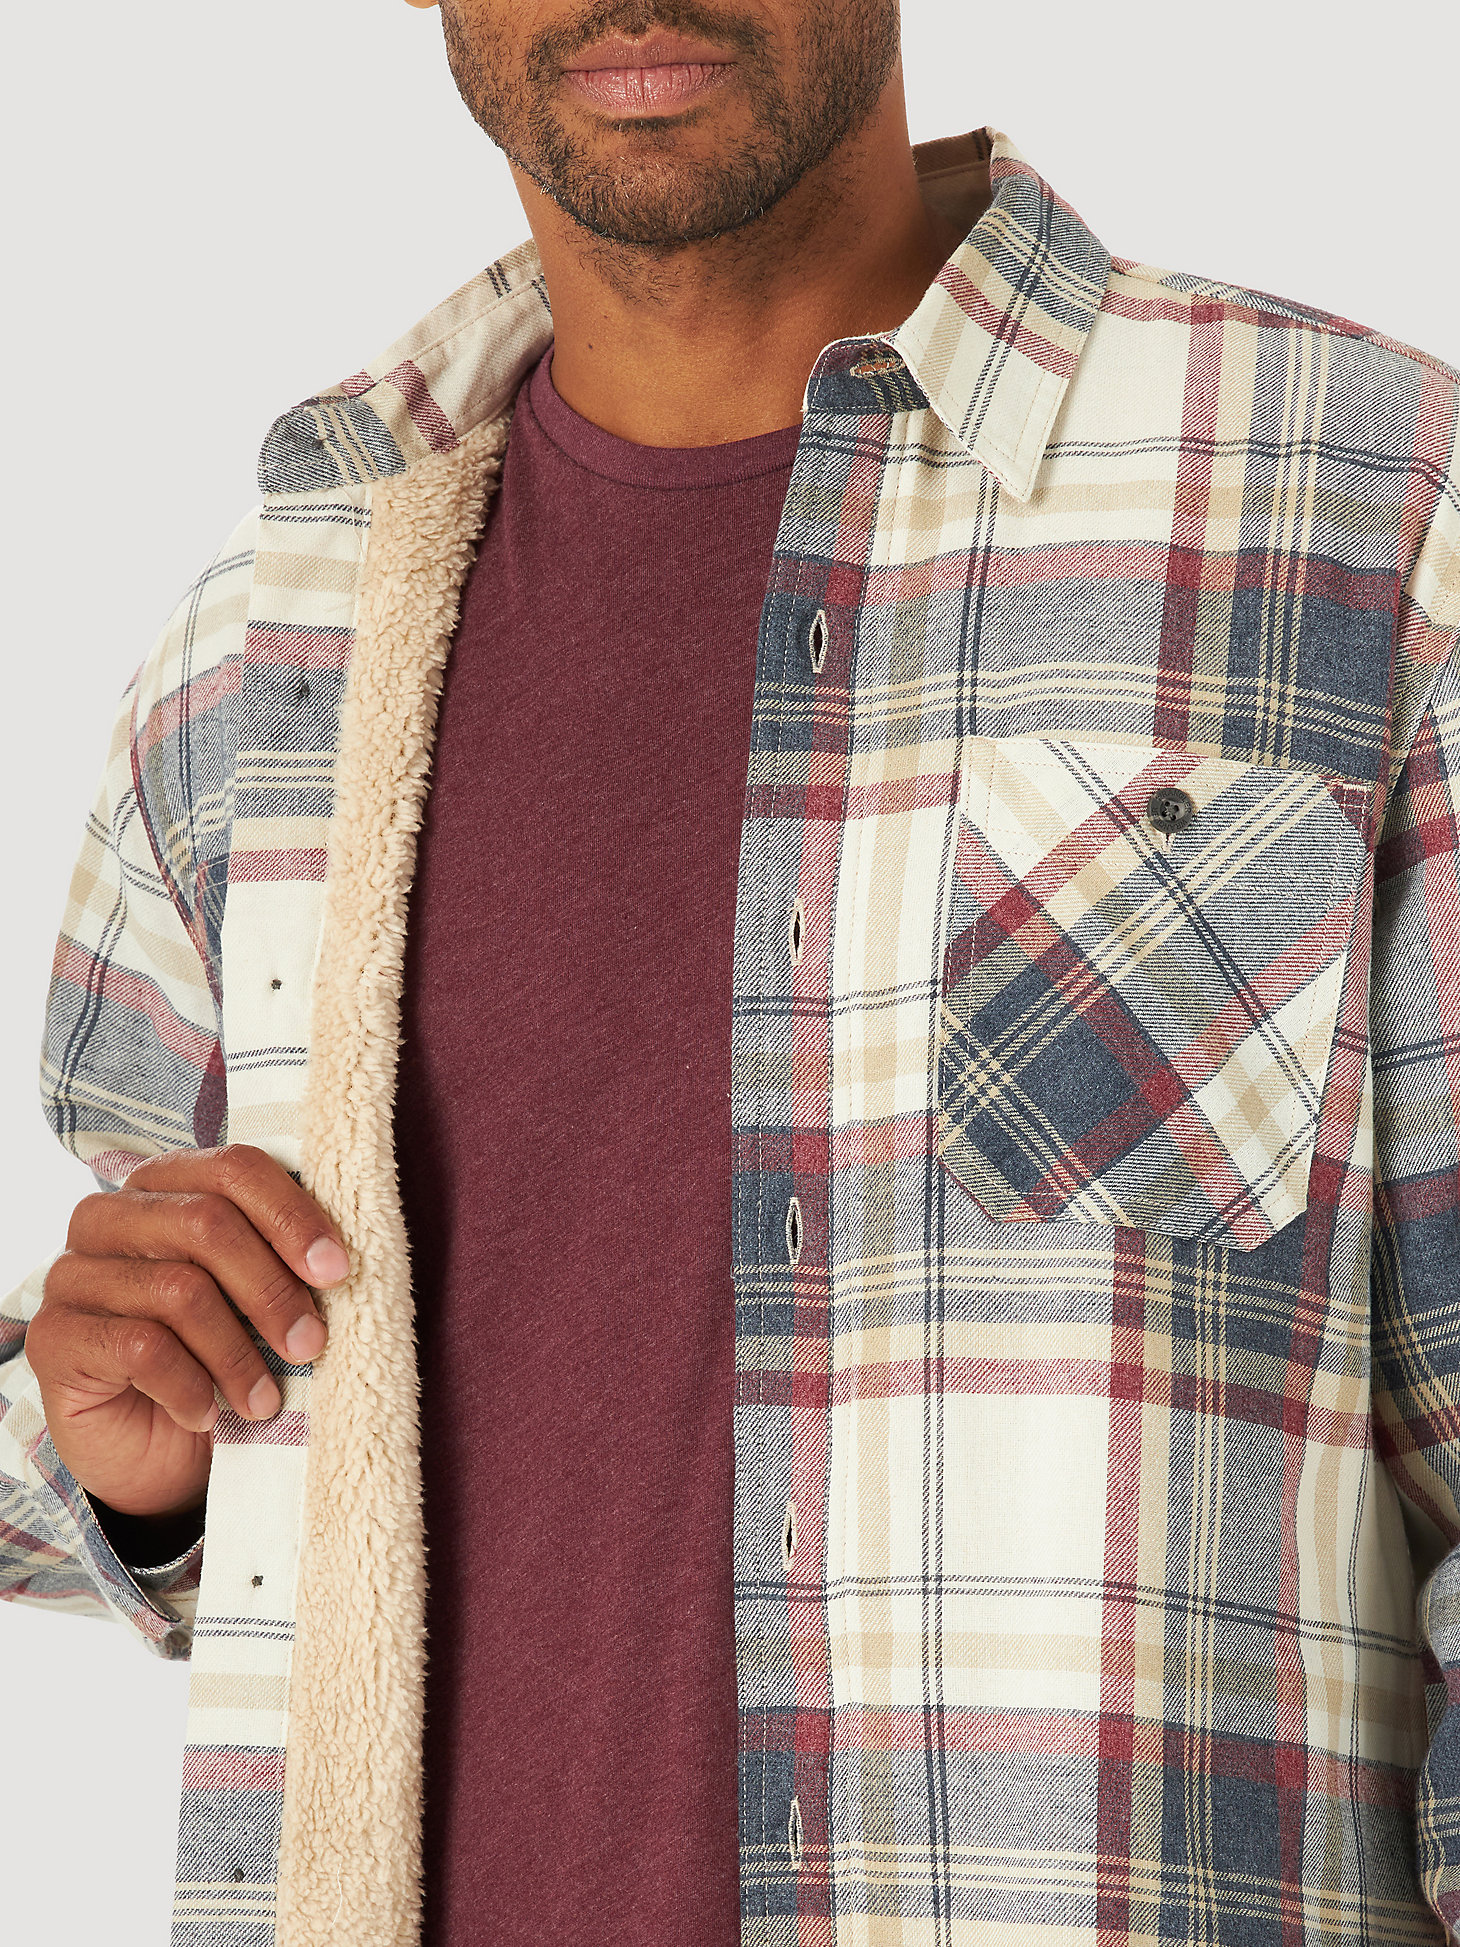 Men's Wrangler® Authentics Sherpa Lined Flannel Shirt in Twill Heather alternative view 3